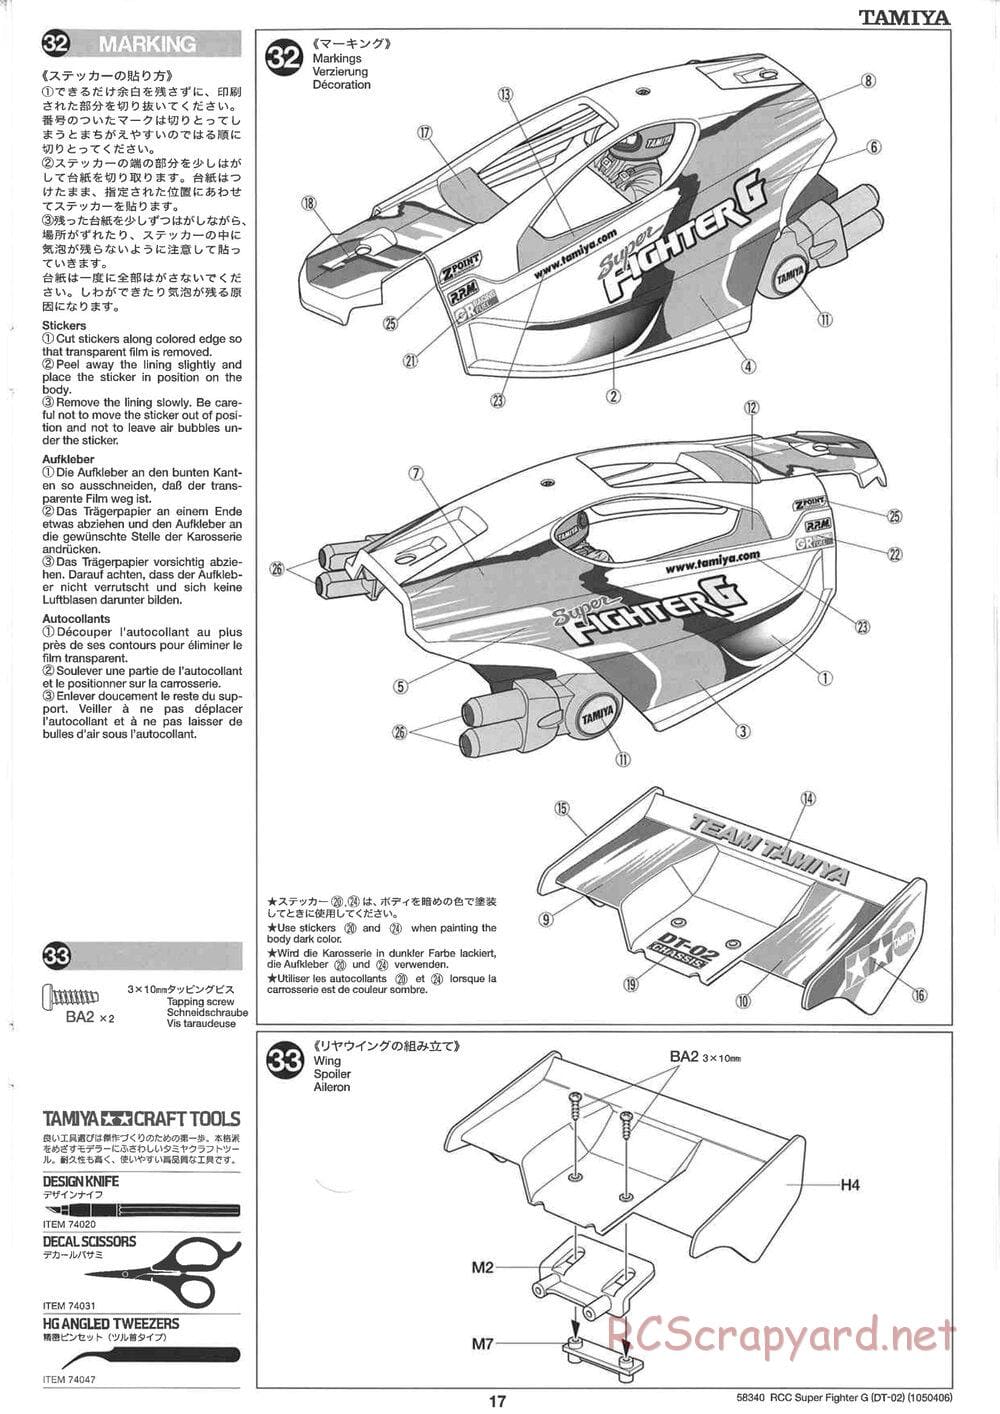 Tamiya - Super Fighter G Chassis - Manual - Page 17